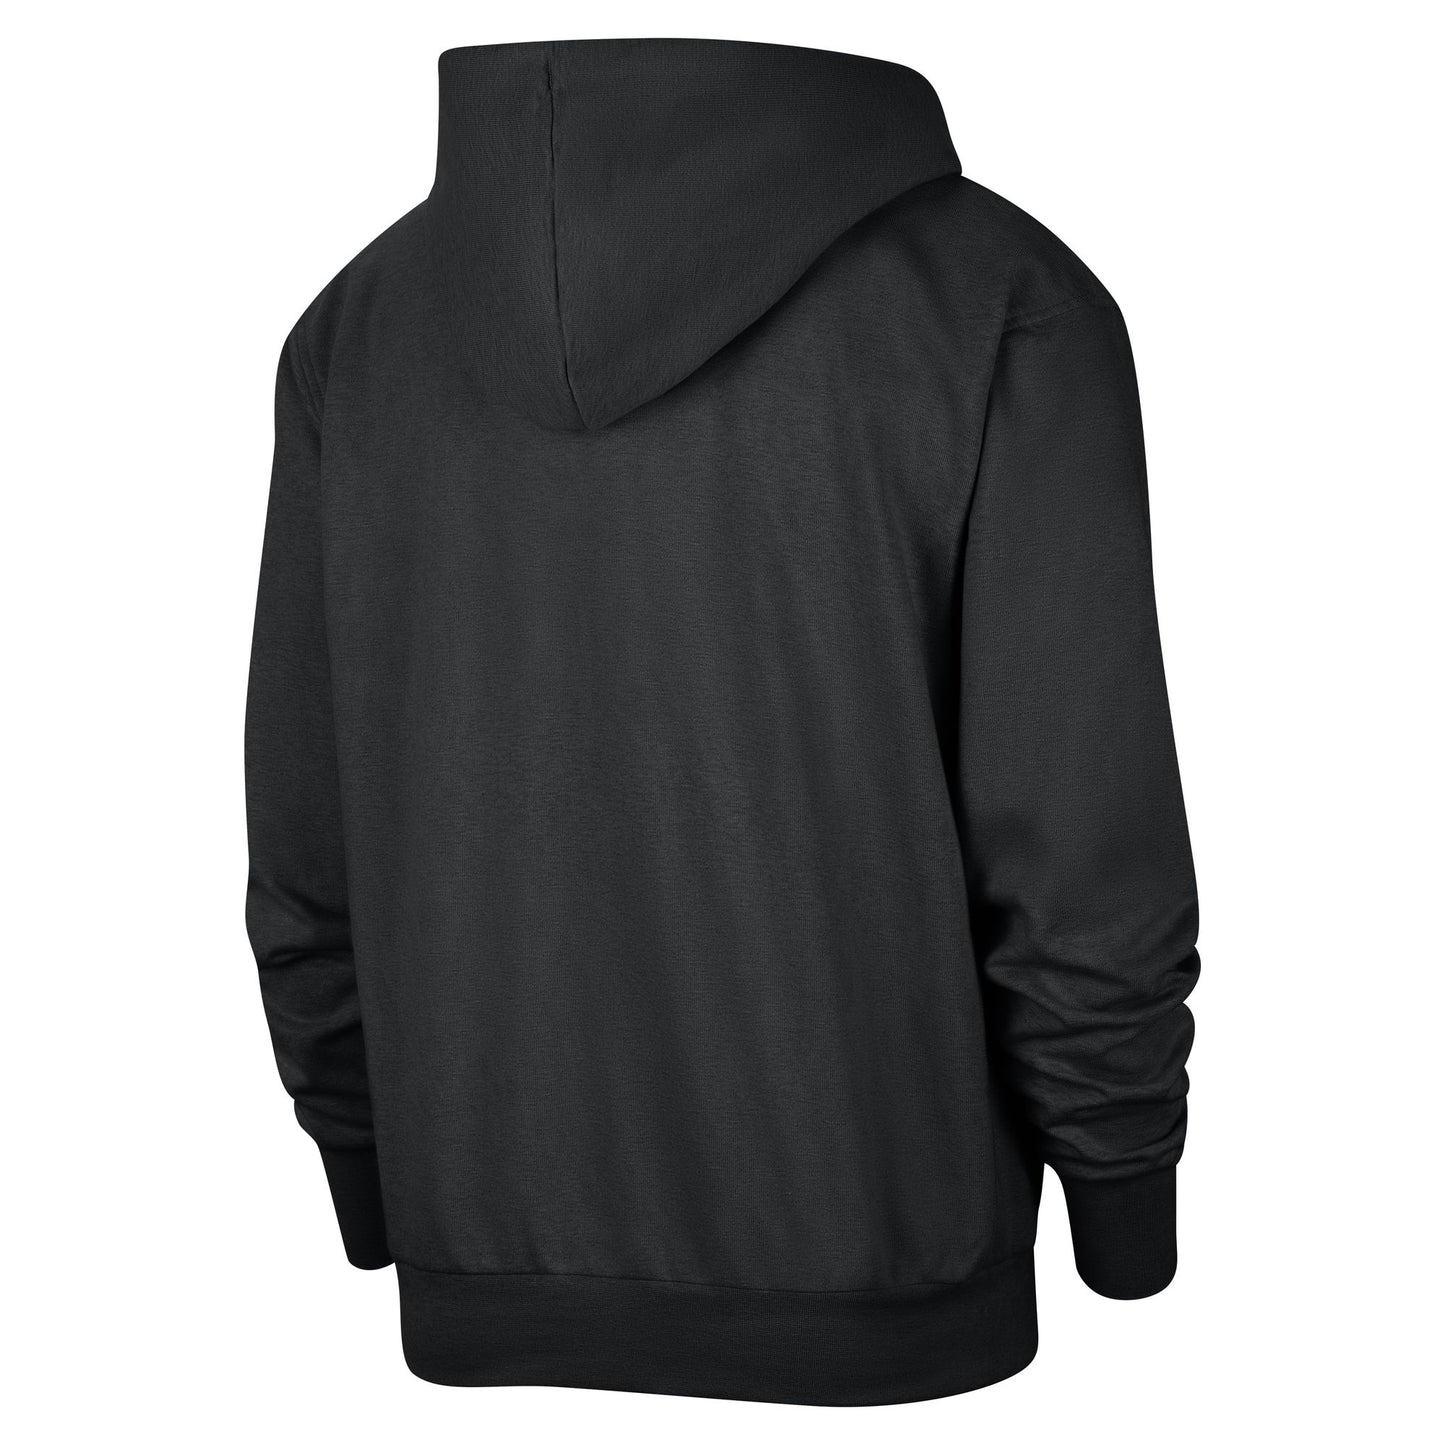 2023 Nuggets Standard Issue Courtside Hoody - Black